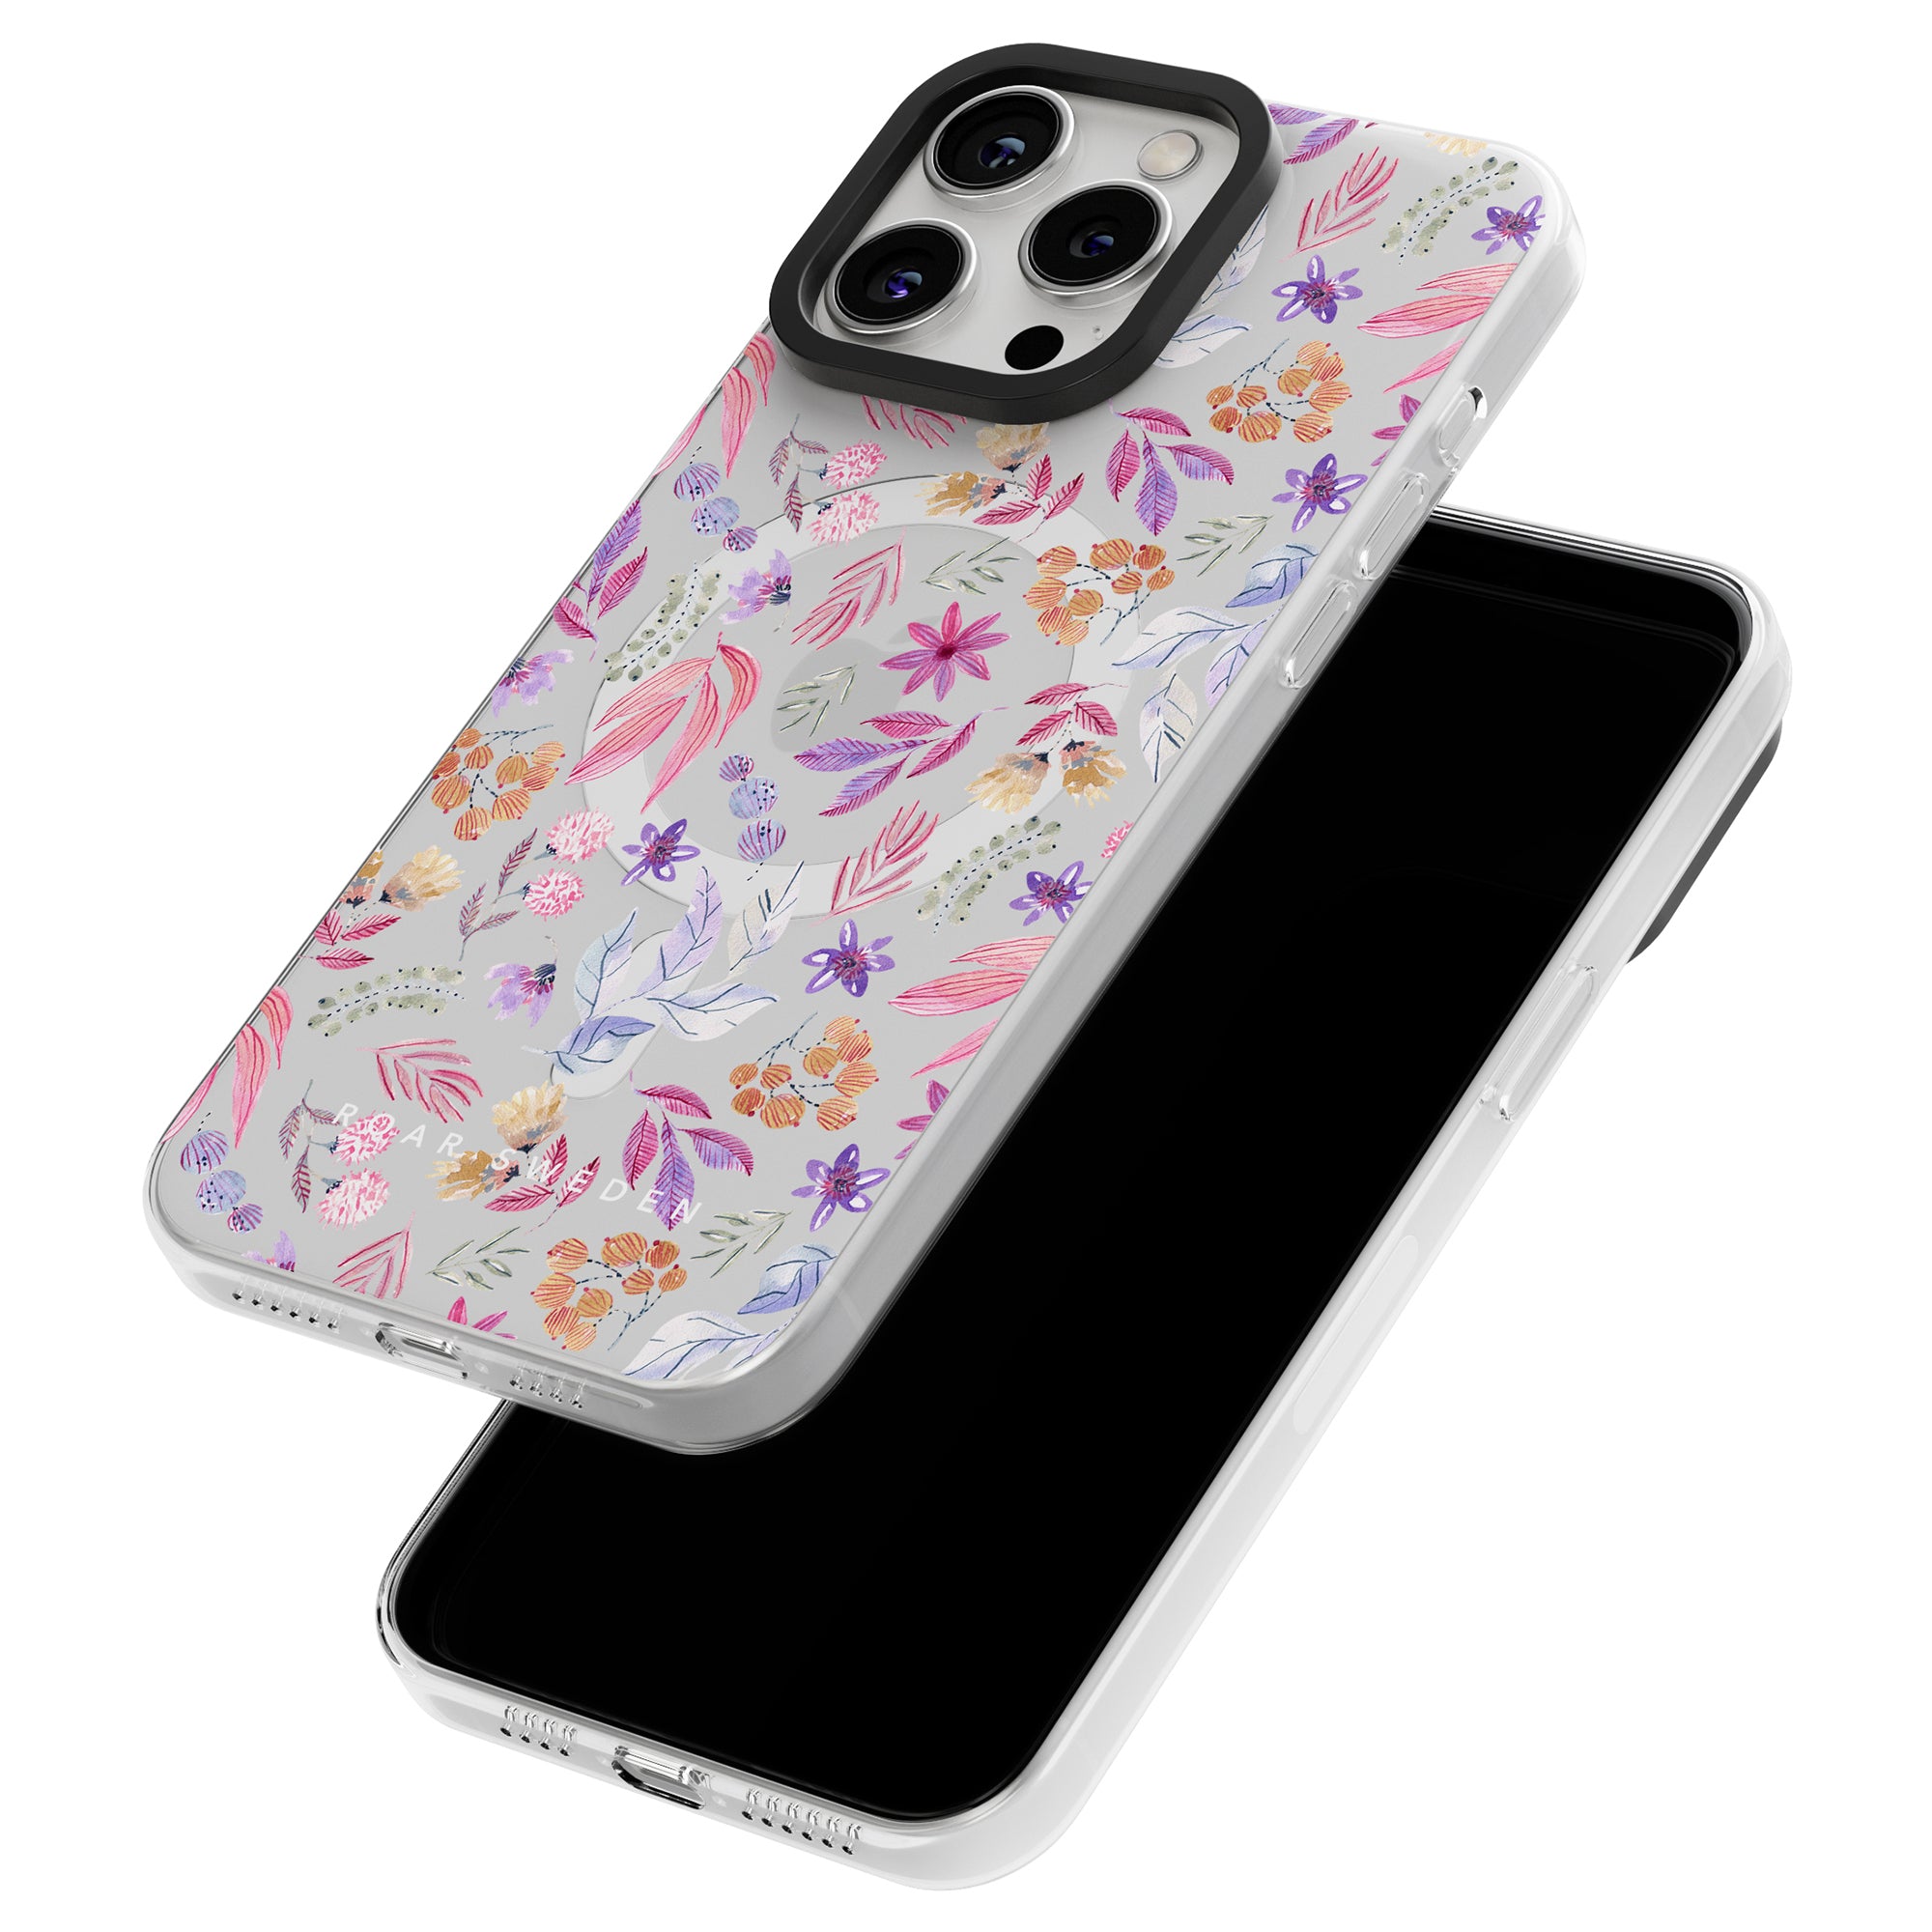 Two smartphones displayed, one with a black screen and the other showcasing a vibrant Flower Power - MagSafe design from our Floral Collection, highlighting the camera lenses and side buttons.